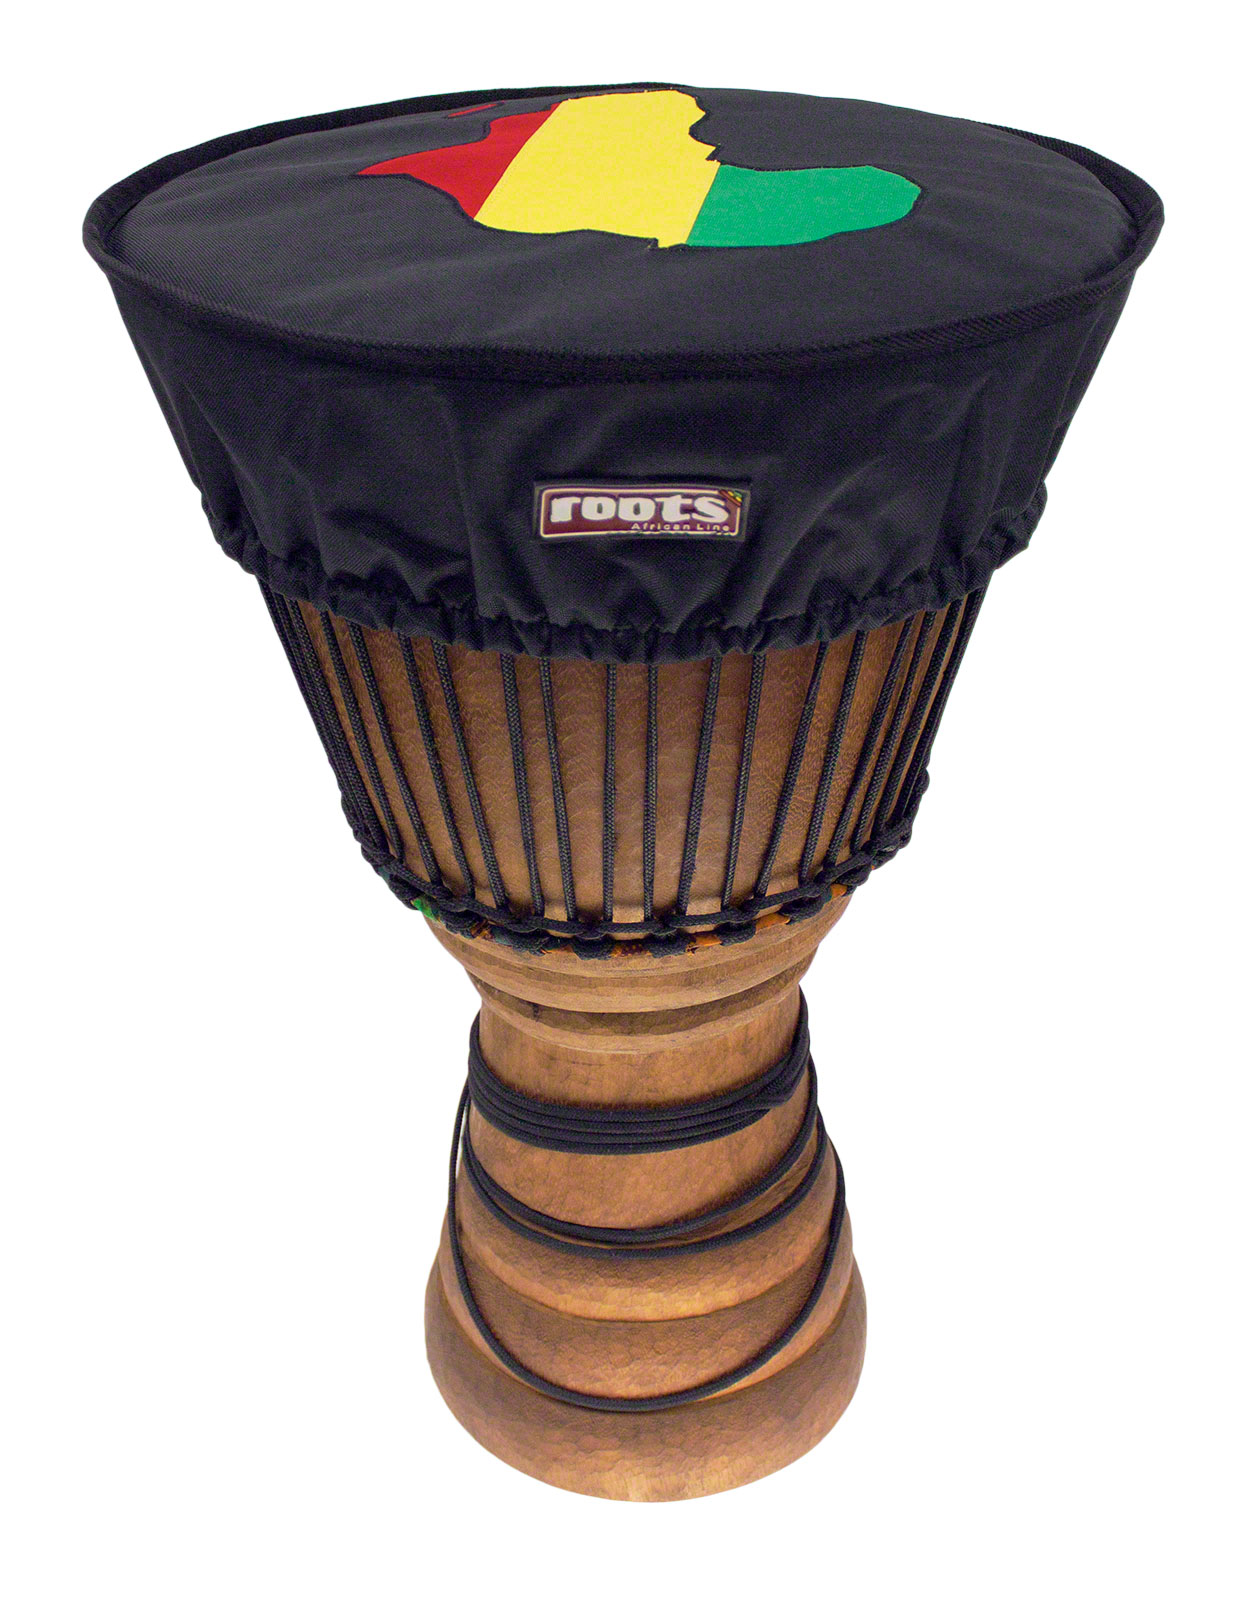 ROOTS PERCUSSION HOUSSE PROTECTION PEAU DJEMBE 35-38 CM NYLON